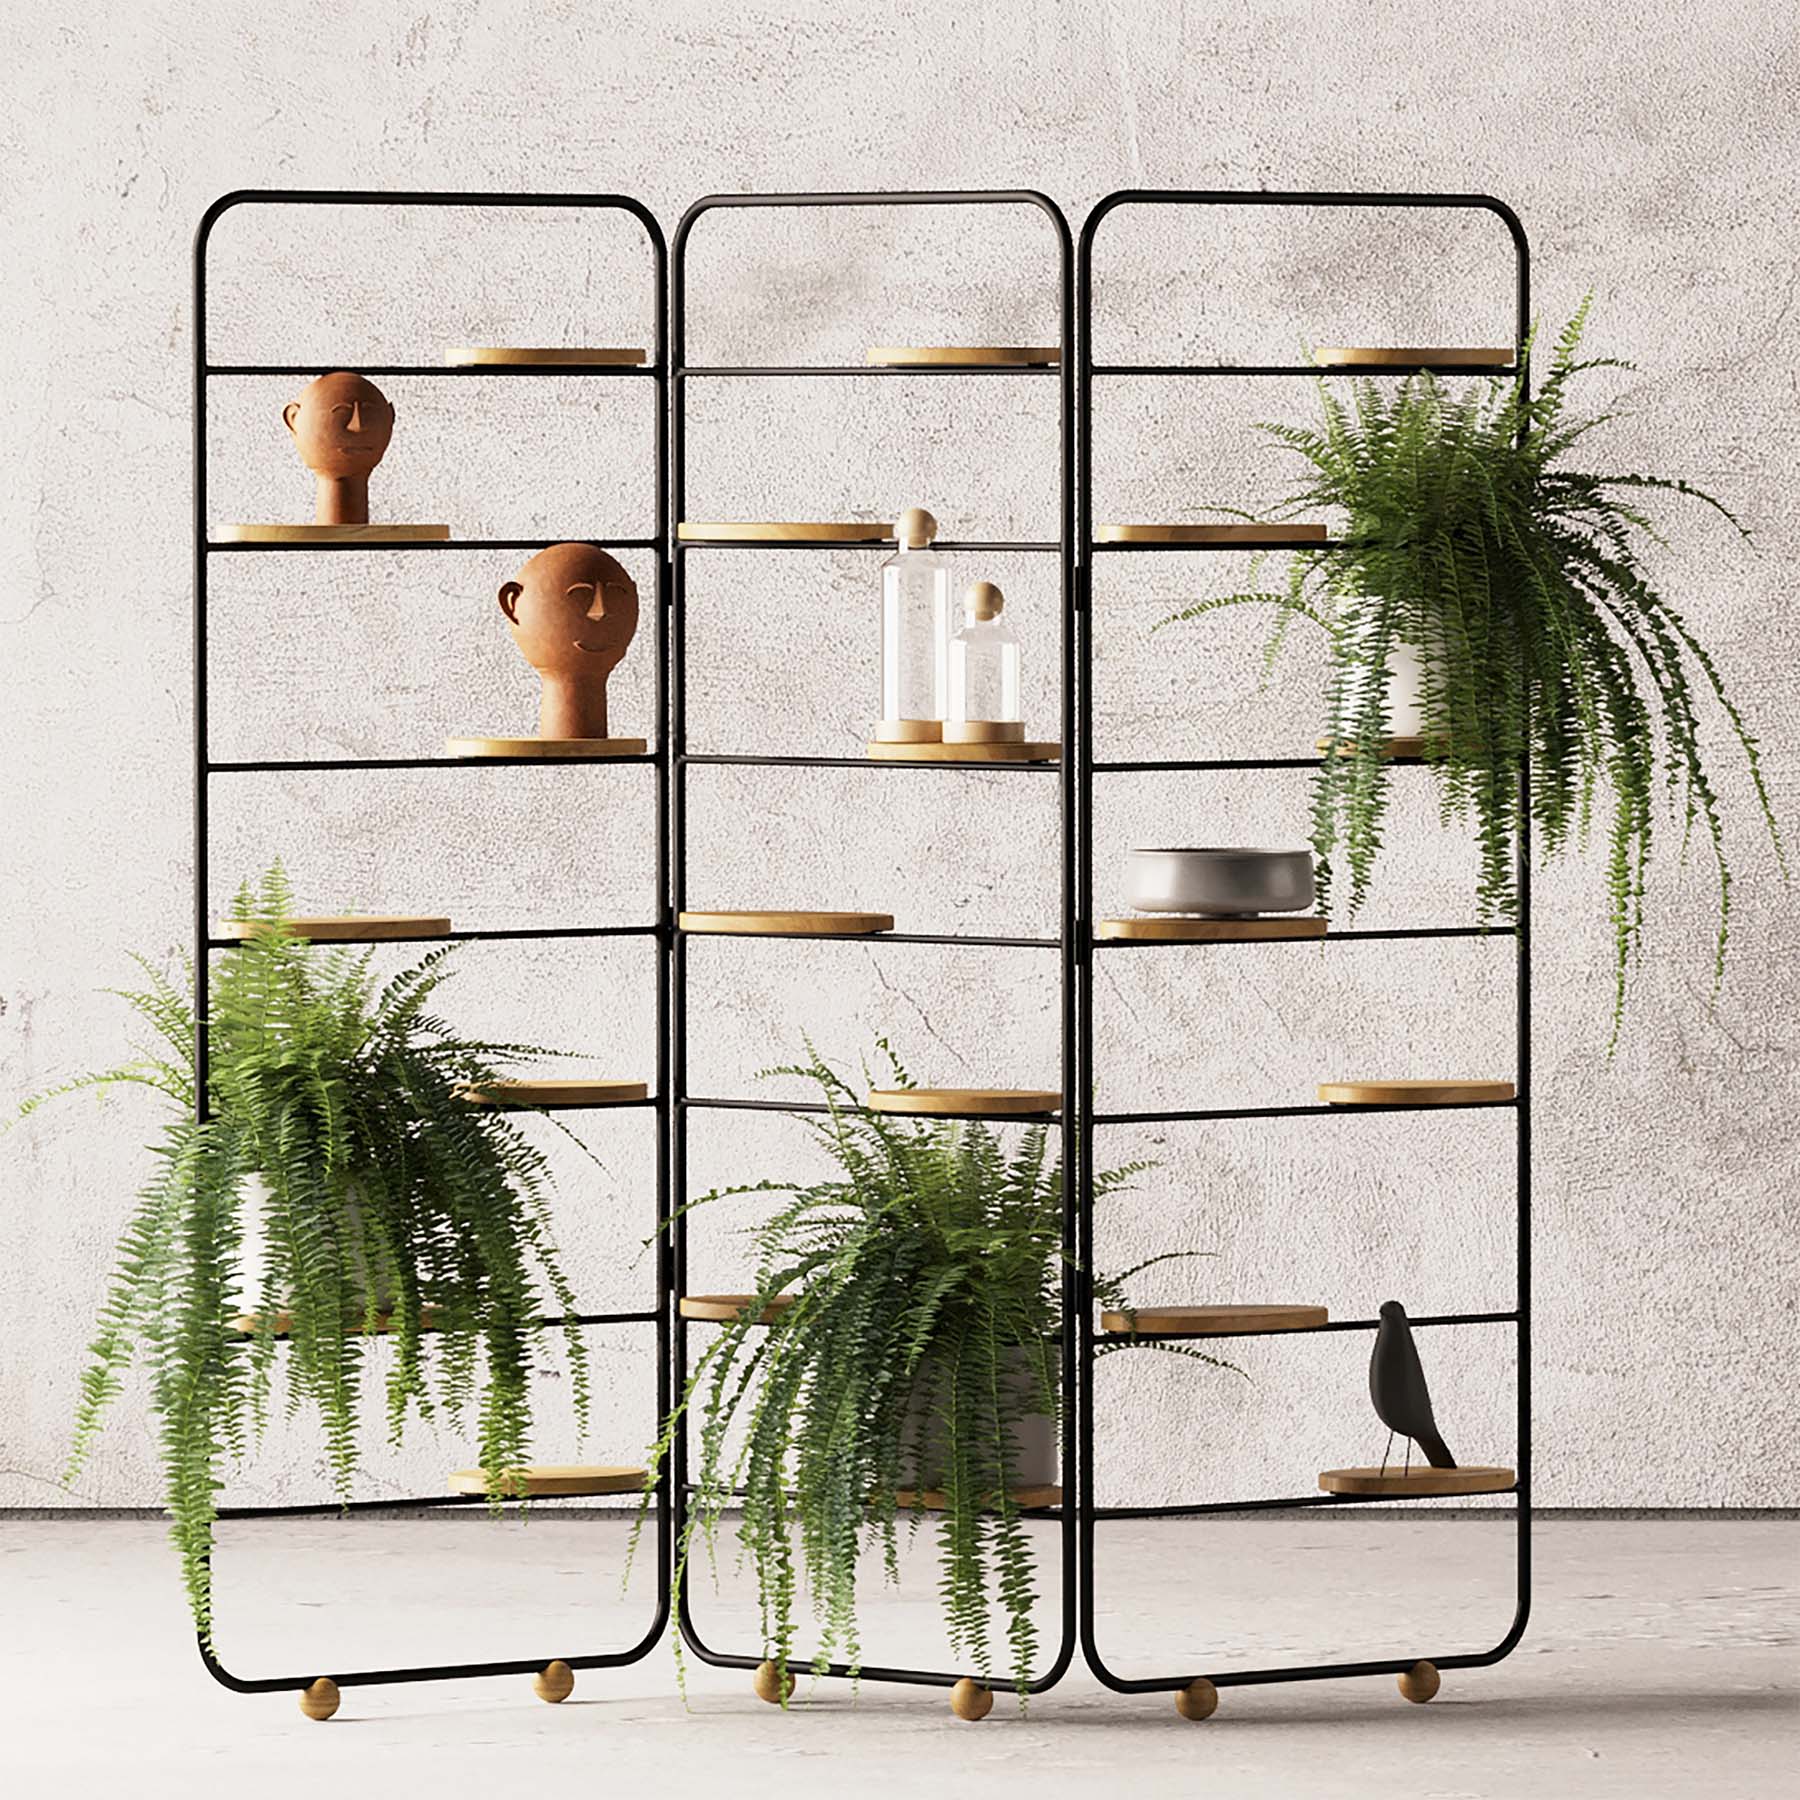 Made of carbon steel and pink peroba, this folding piece can be used as a dividing screen, bookshelf and mobile vertical garden.